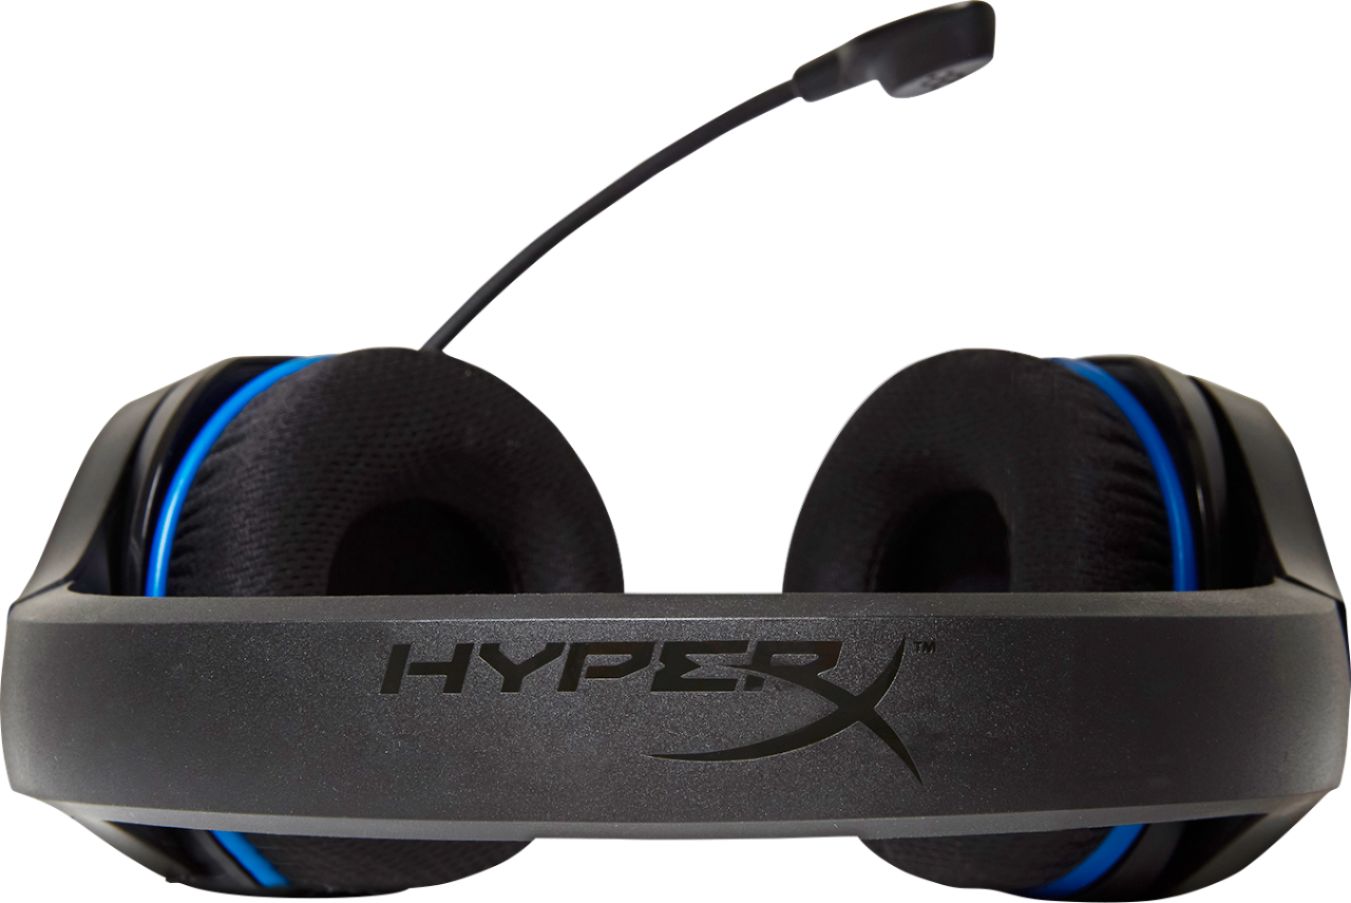  HyperX Cloud Stinger Core - Gaming Headset for PlayStation 4  and 5, Over-Ear Wired Headset with Mic, Passive Noise Cancelling, Immersive  In-Game Audio, In-Line Audio Control, Black : Everything Else